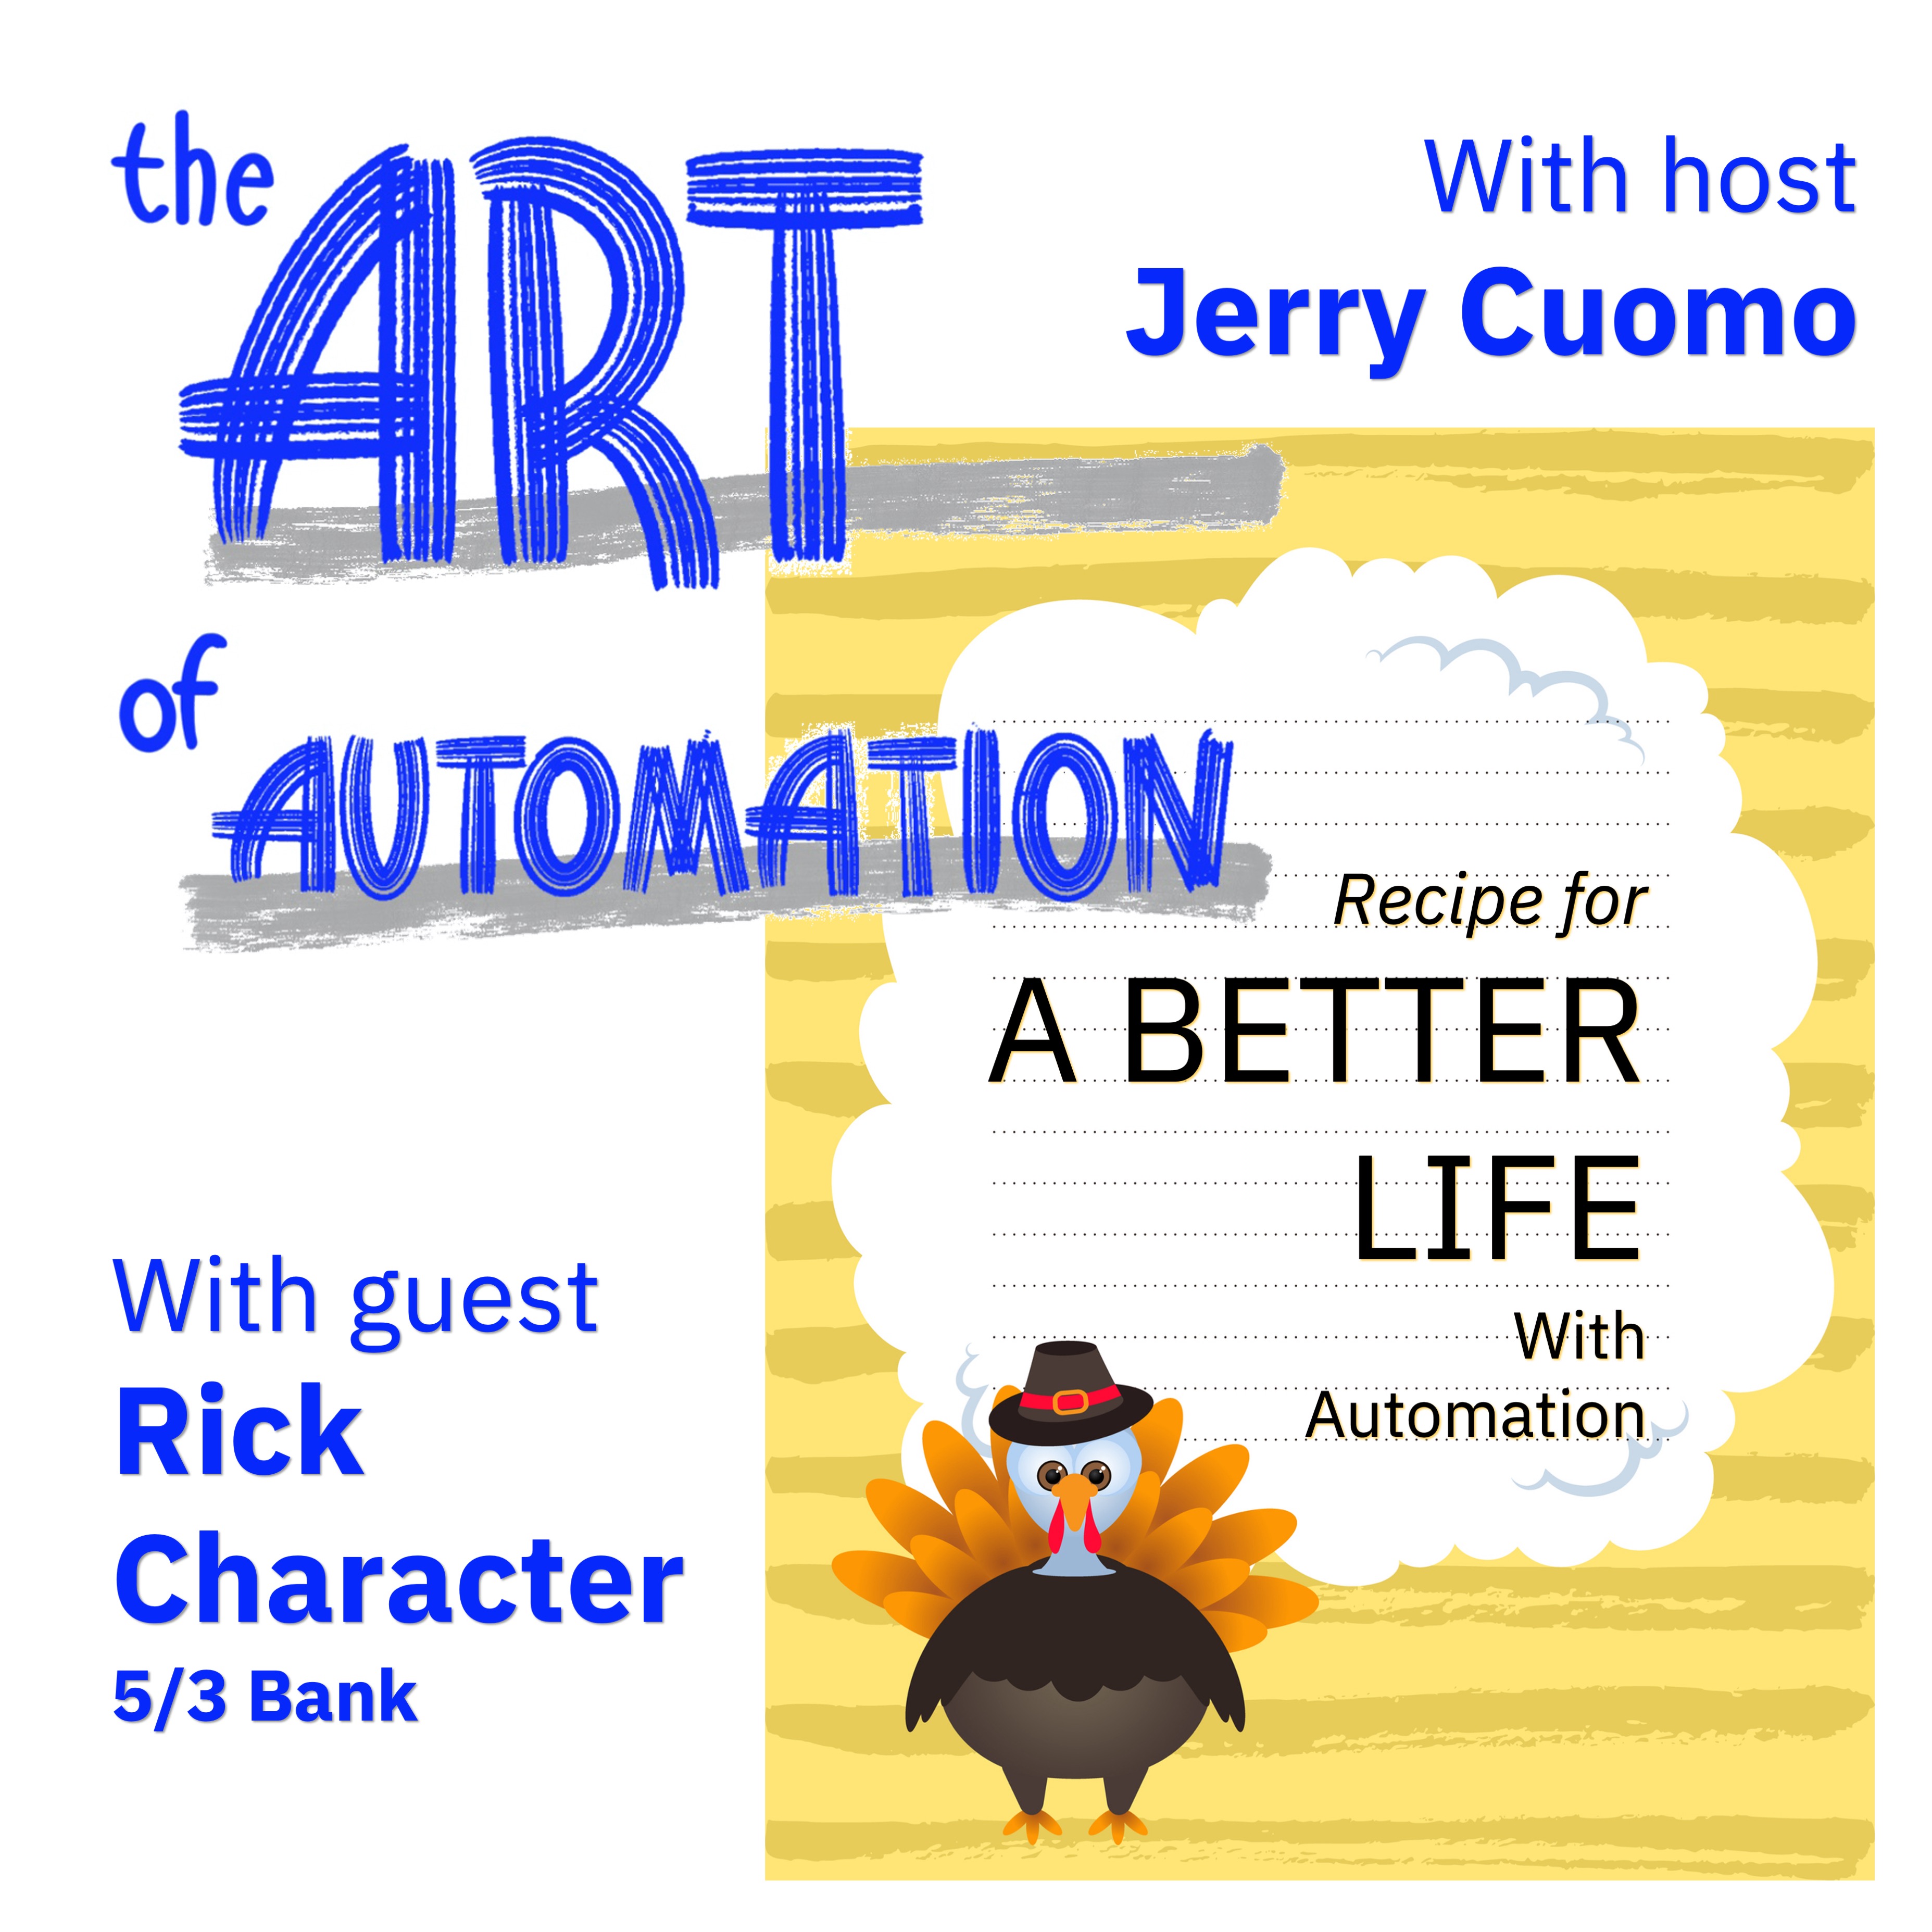 Recipe for a Better Life with Automation